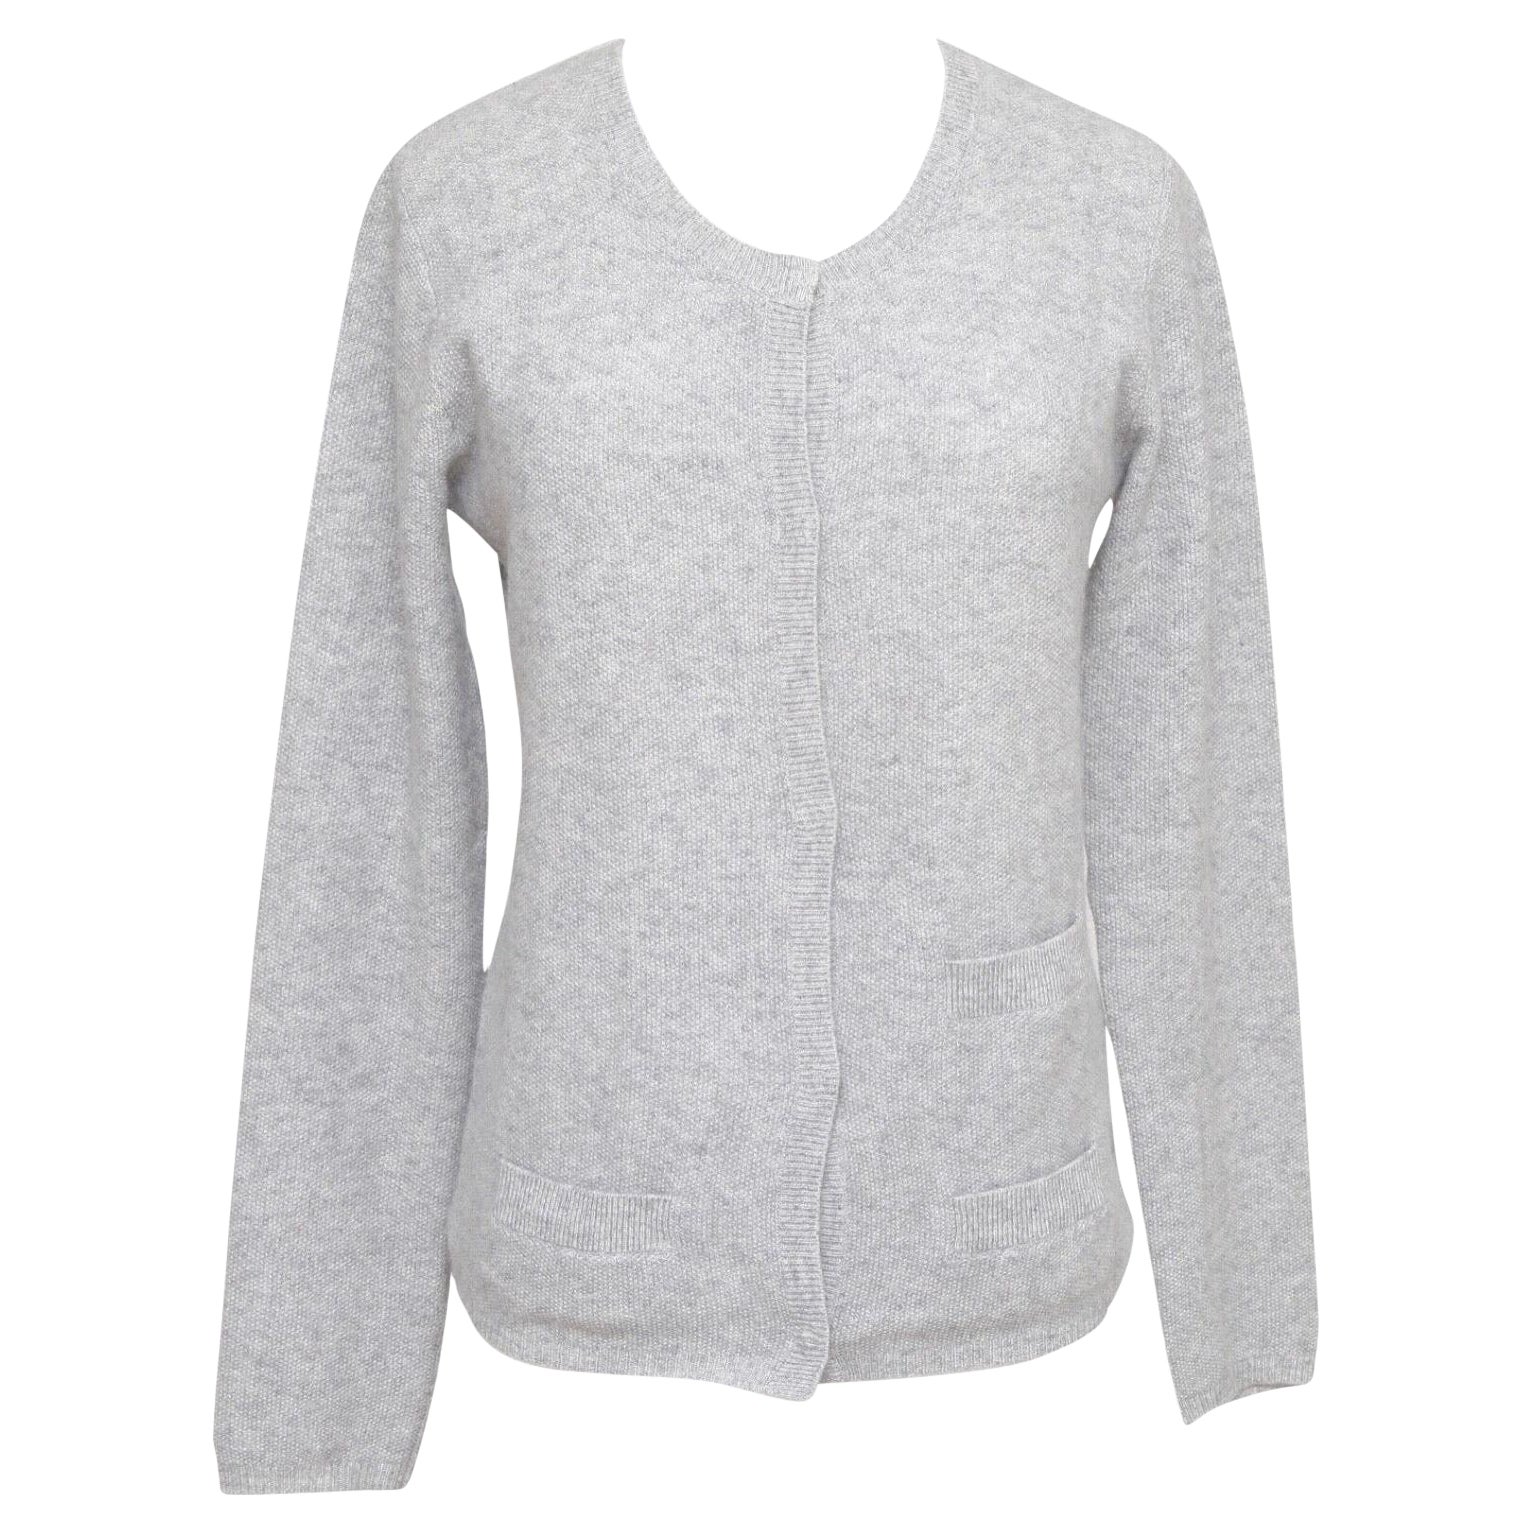 CHLOE Grey Cardigan Sweater Knit Cashmere Long Sleeve Snap Closure Sz XS For Sale